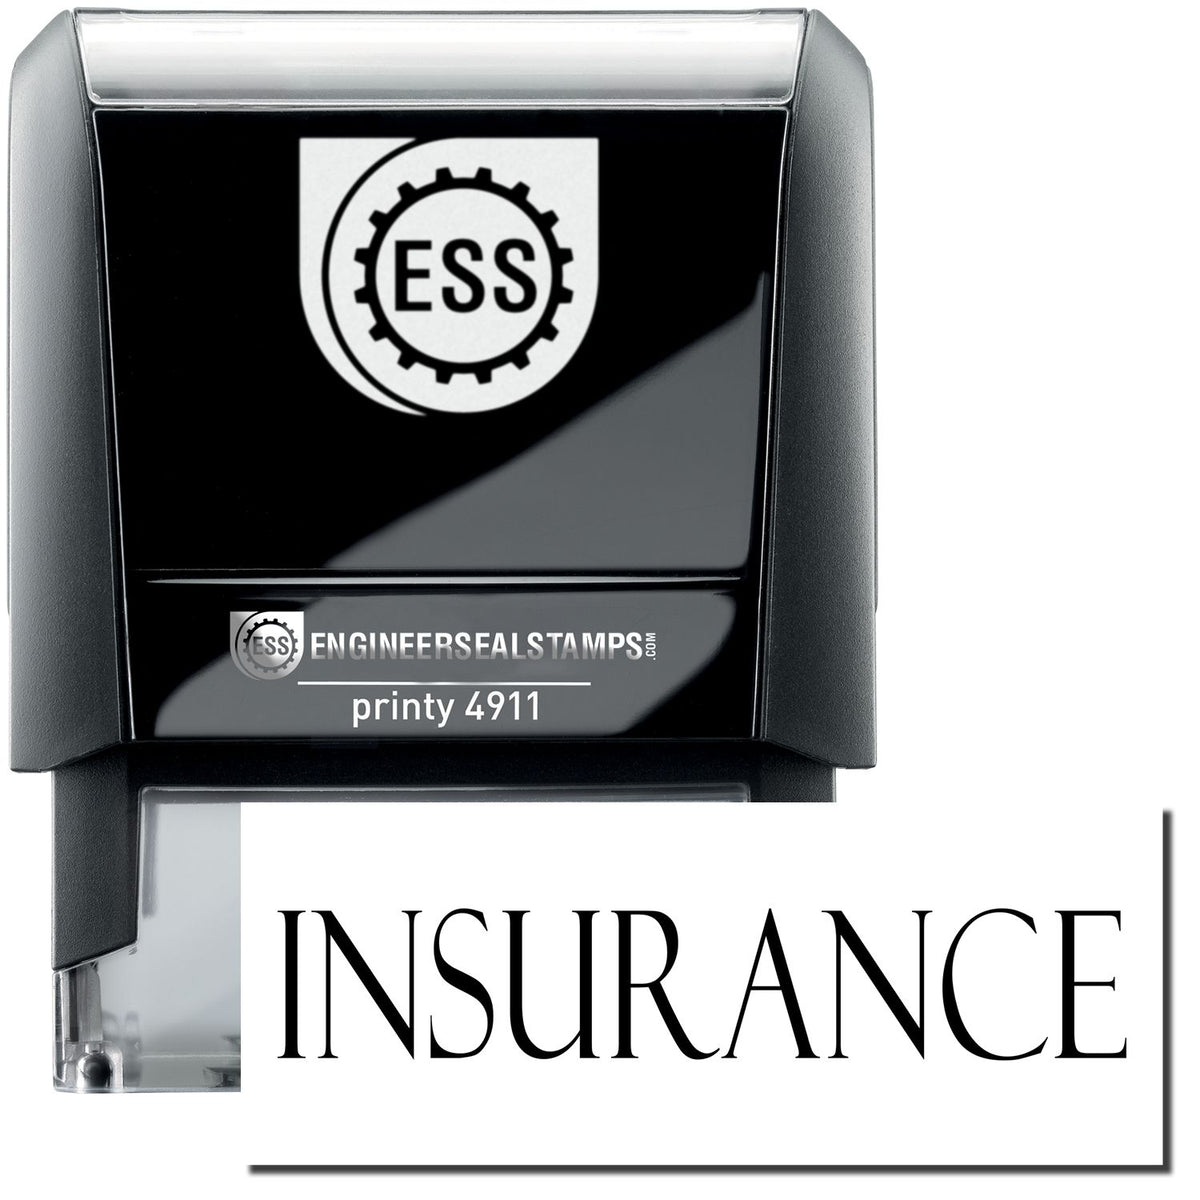 A self-inking stamp with a stamped image showing how the text &quot;INSURANCE&quot; is displayed after stamping.